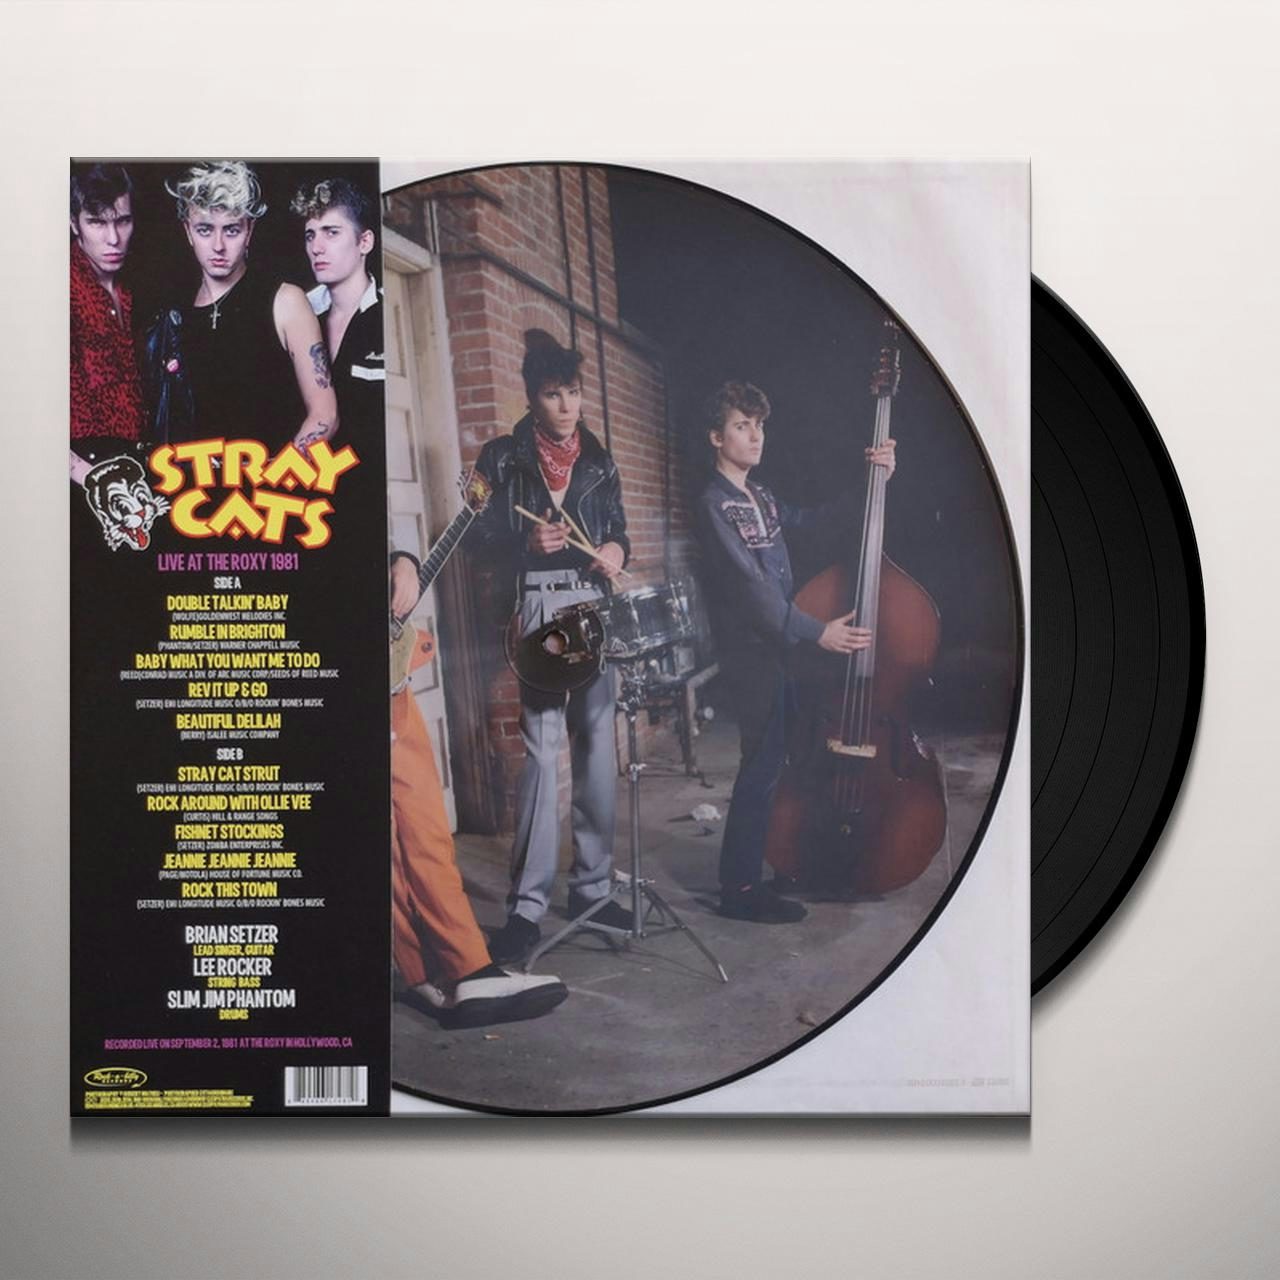 Stray Cats LIVE AT MONTREUX 1981 DVD